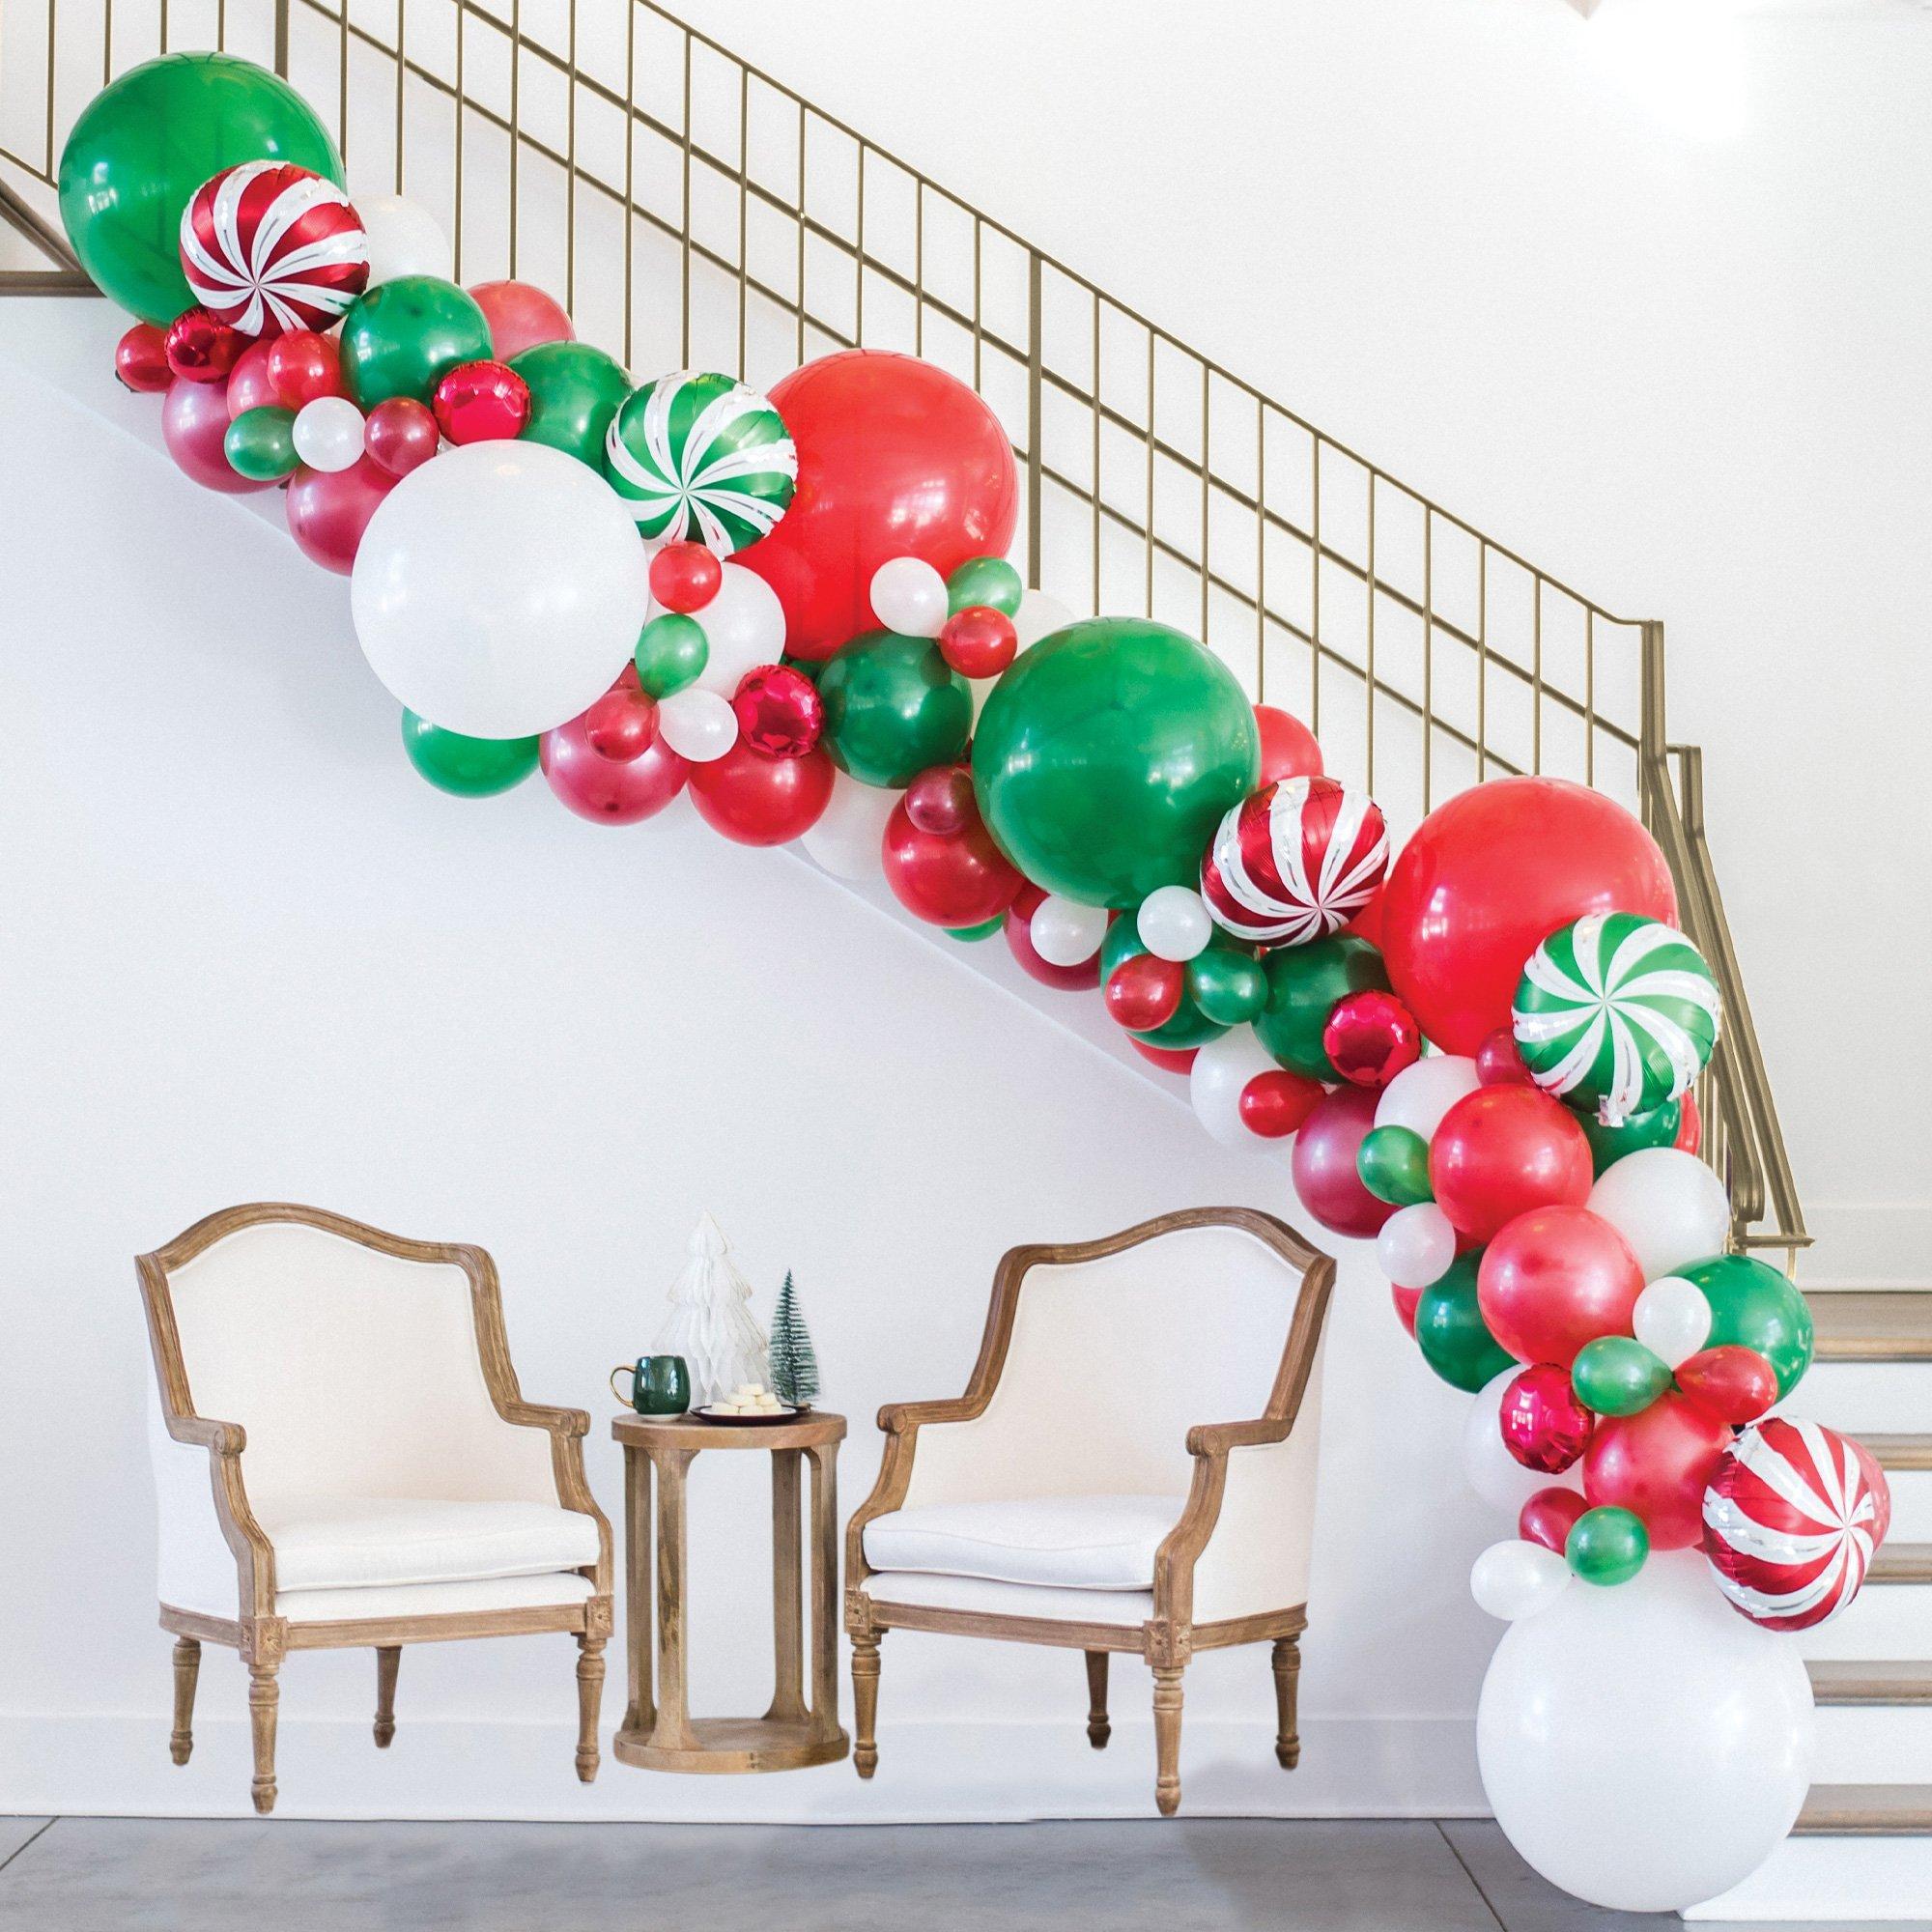 Balloon Arch Kits, Strips & Decorations | Party City